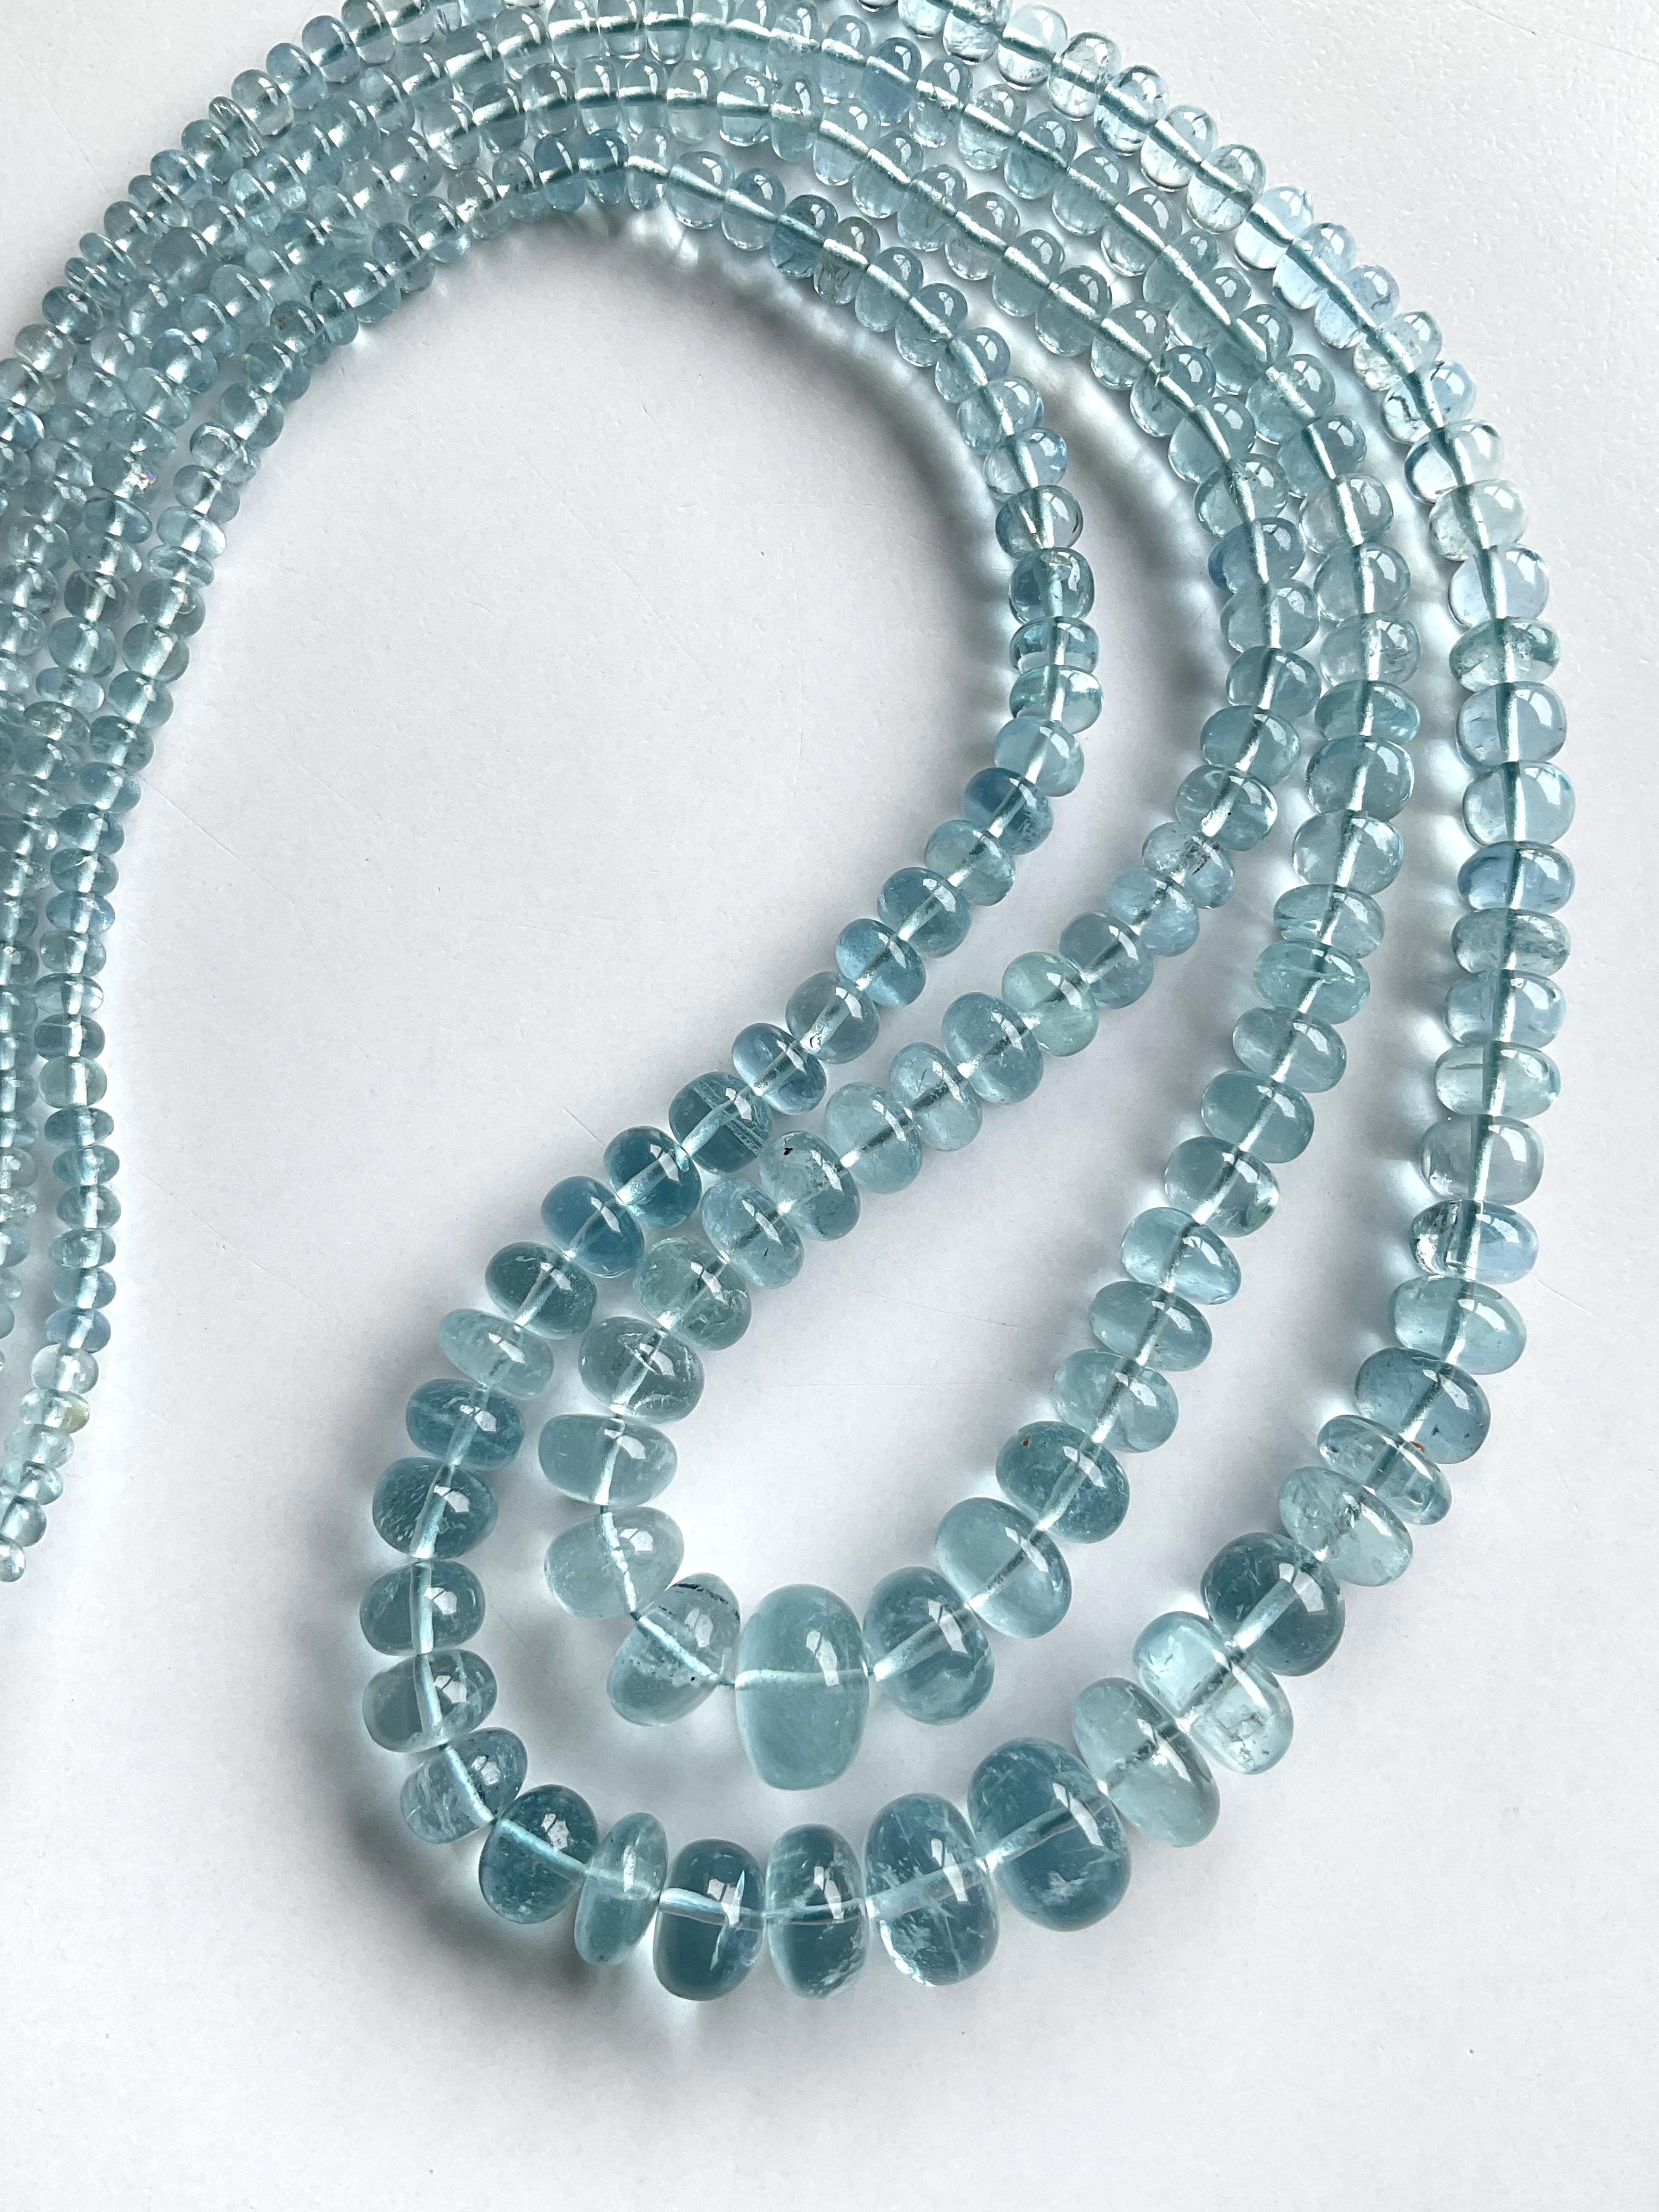 198.75 Carats Aquamarine Necklace Beads 2 Strands Top Quality Natural Gemstones For Sale 2